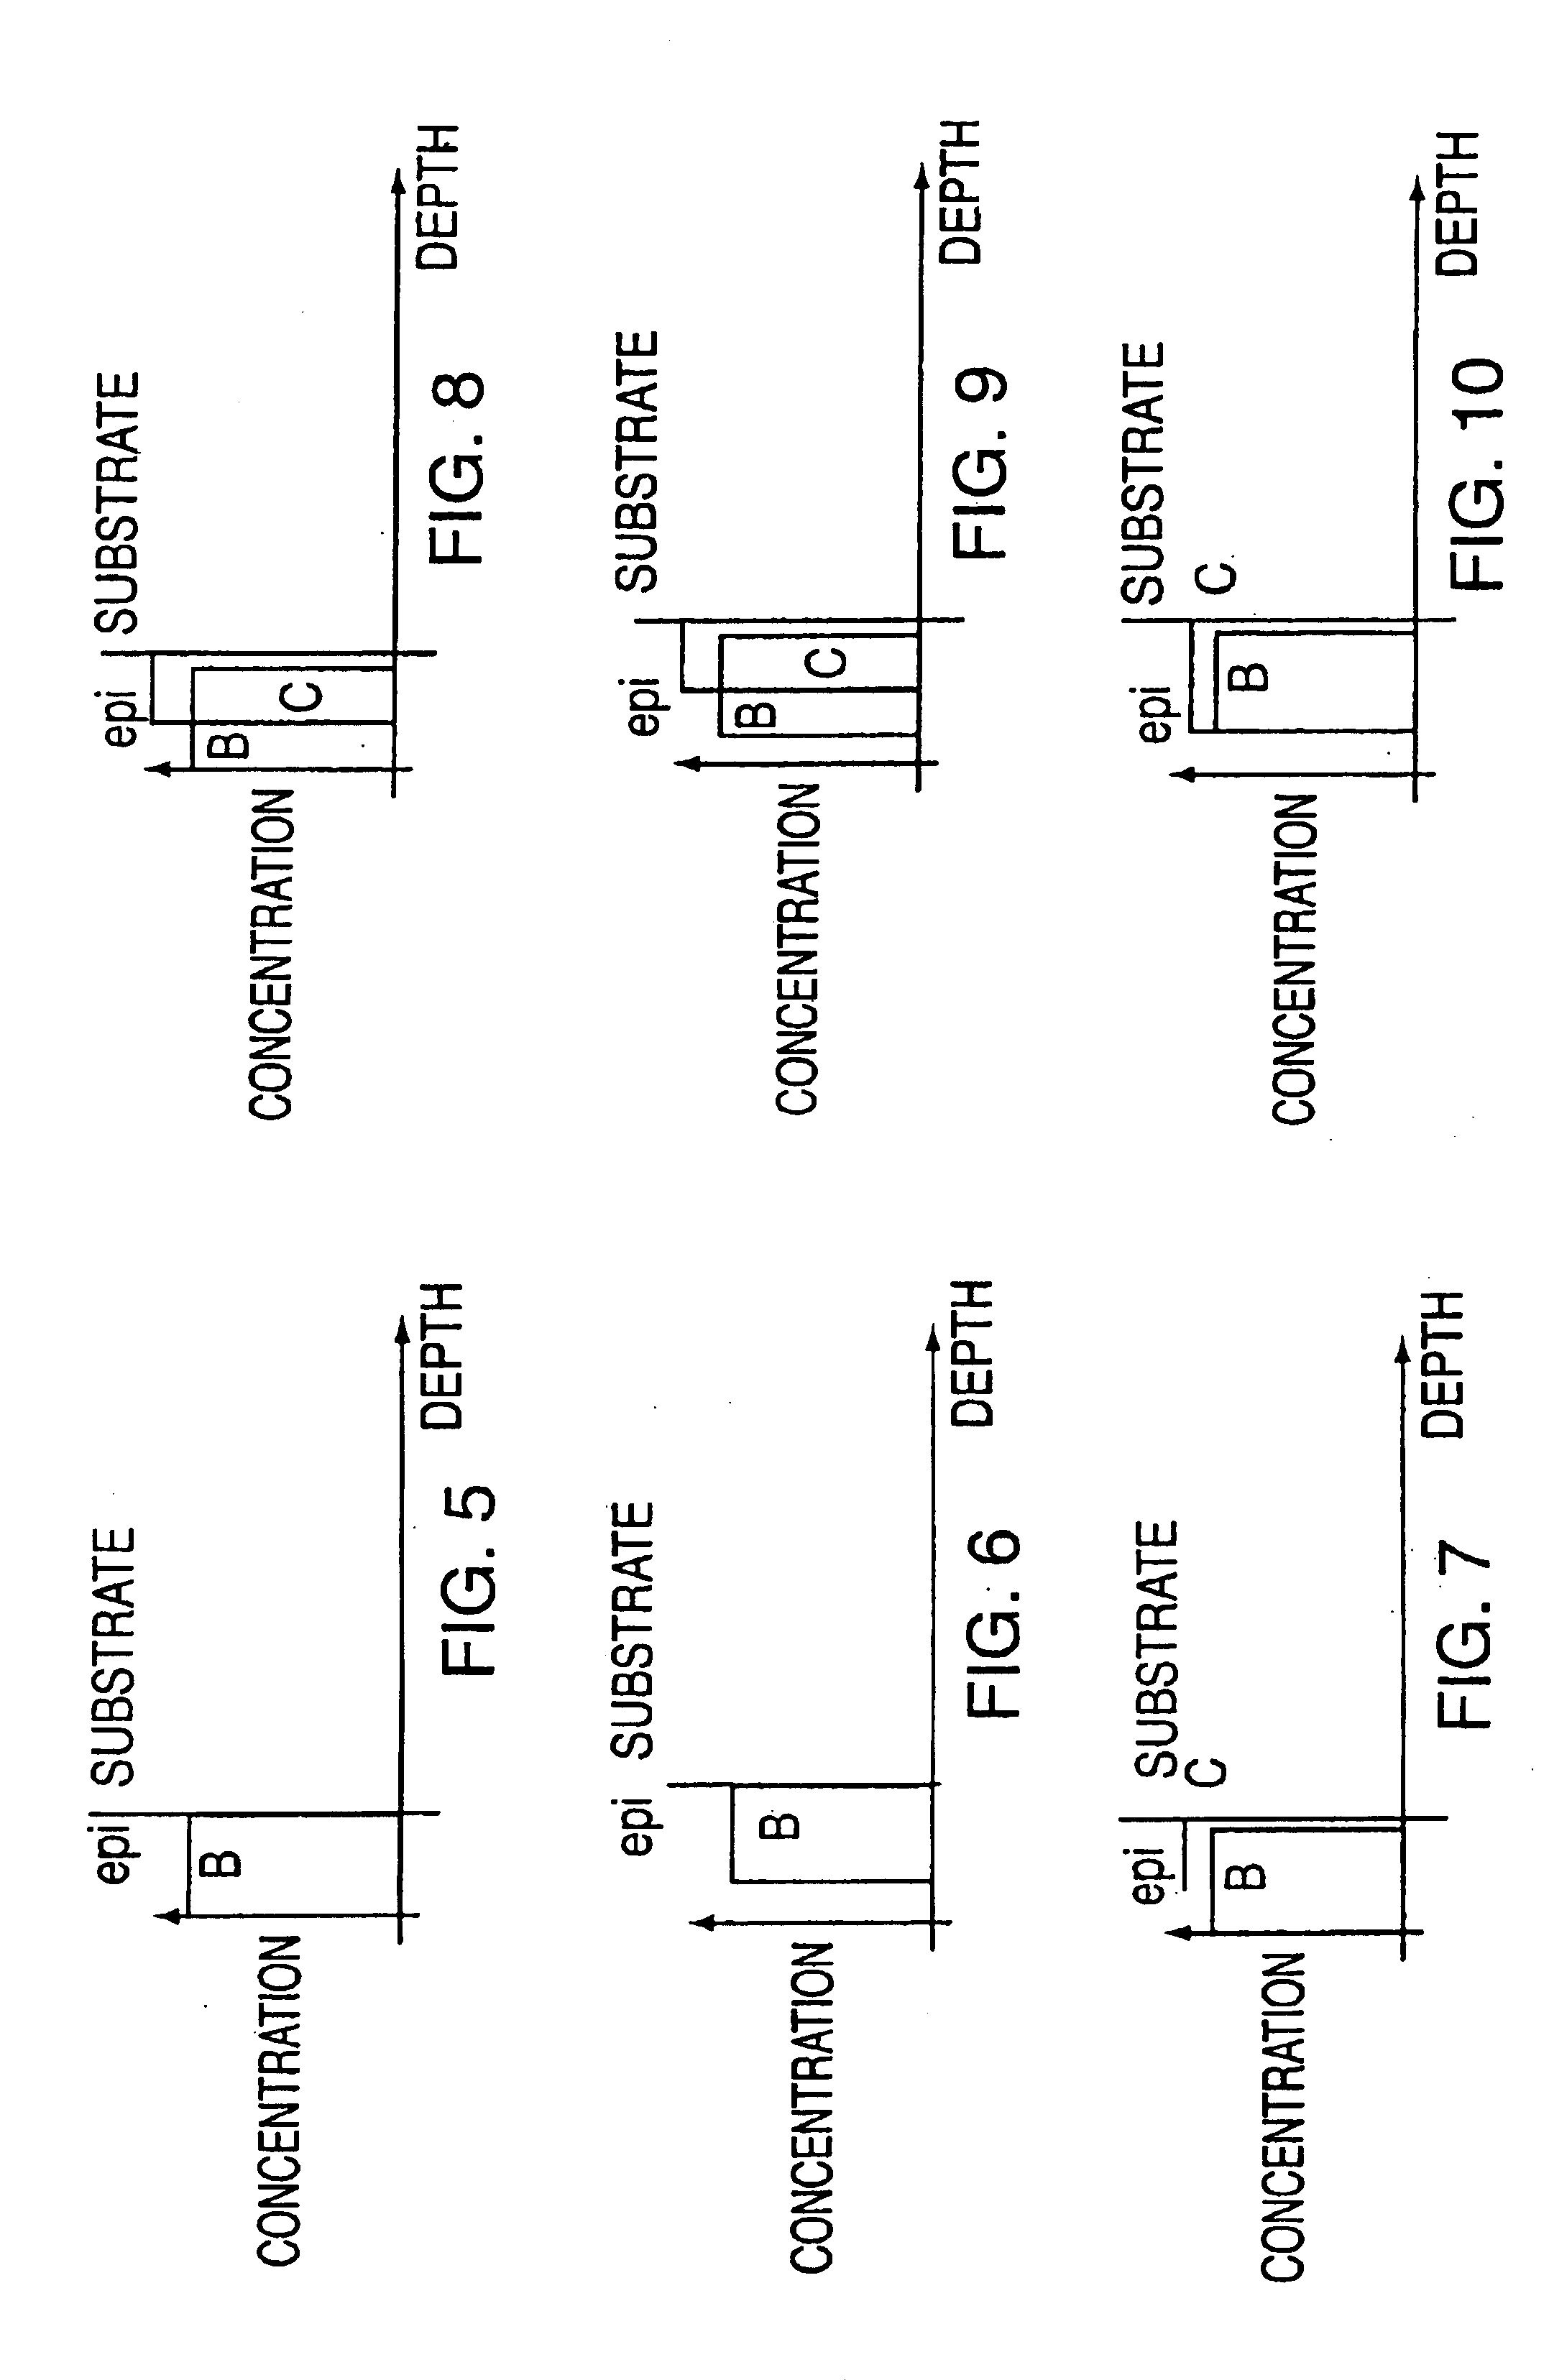 High performance CMOS device structure with mid-gap metal gate